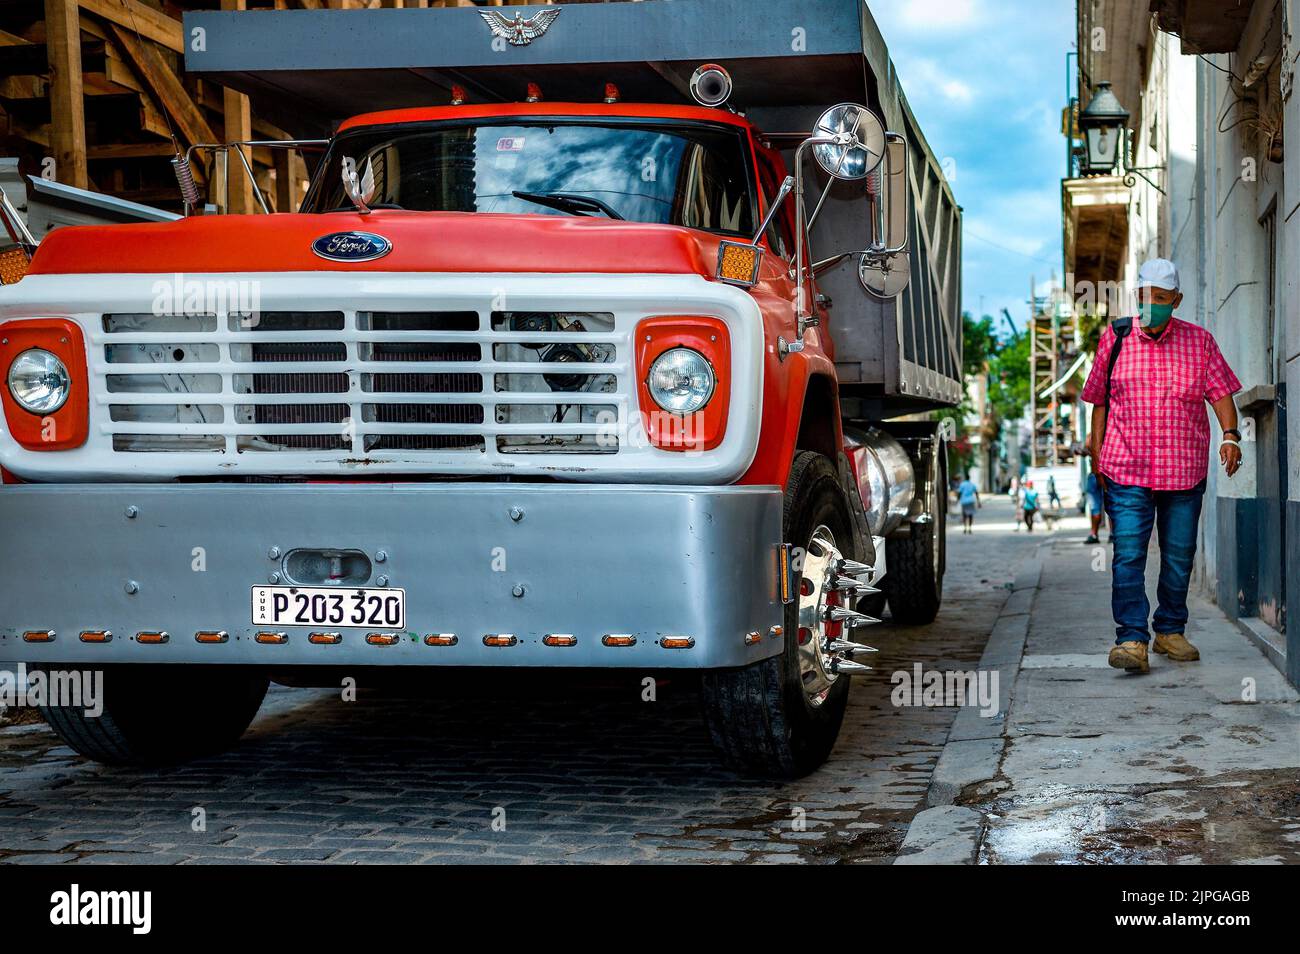 Ford vintage renovated truck in one of the Old Havana streets with a Cuban passing by. Stock Photo